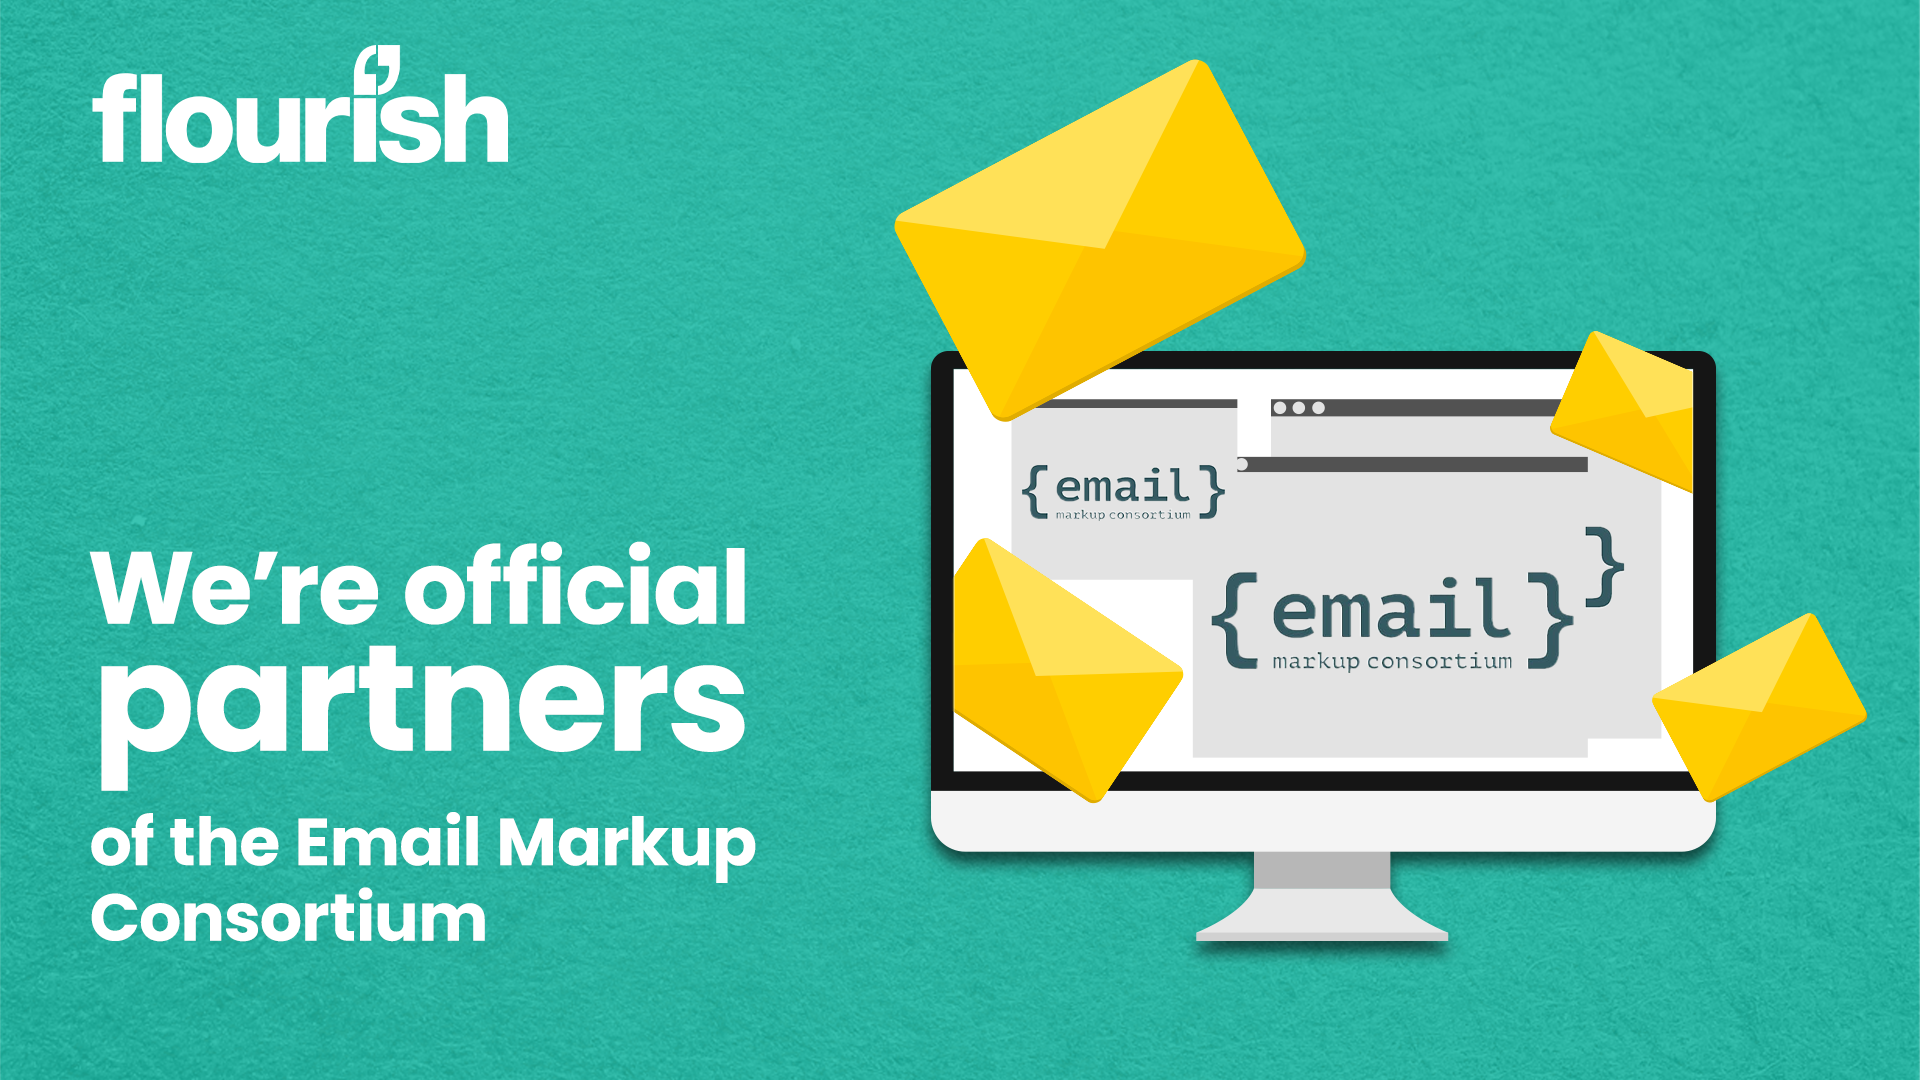 We're official partners of the Email Markup Consortium